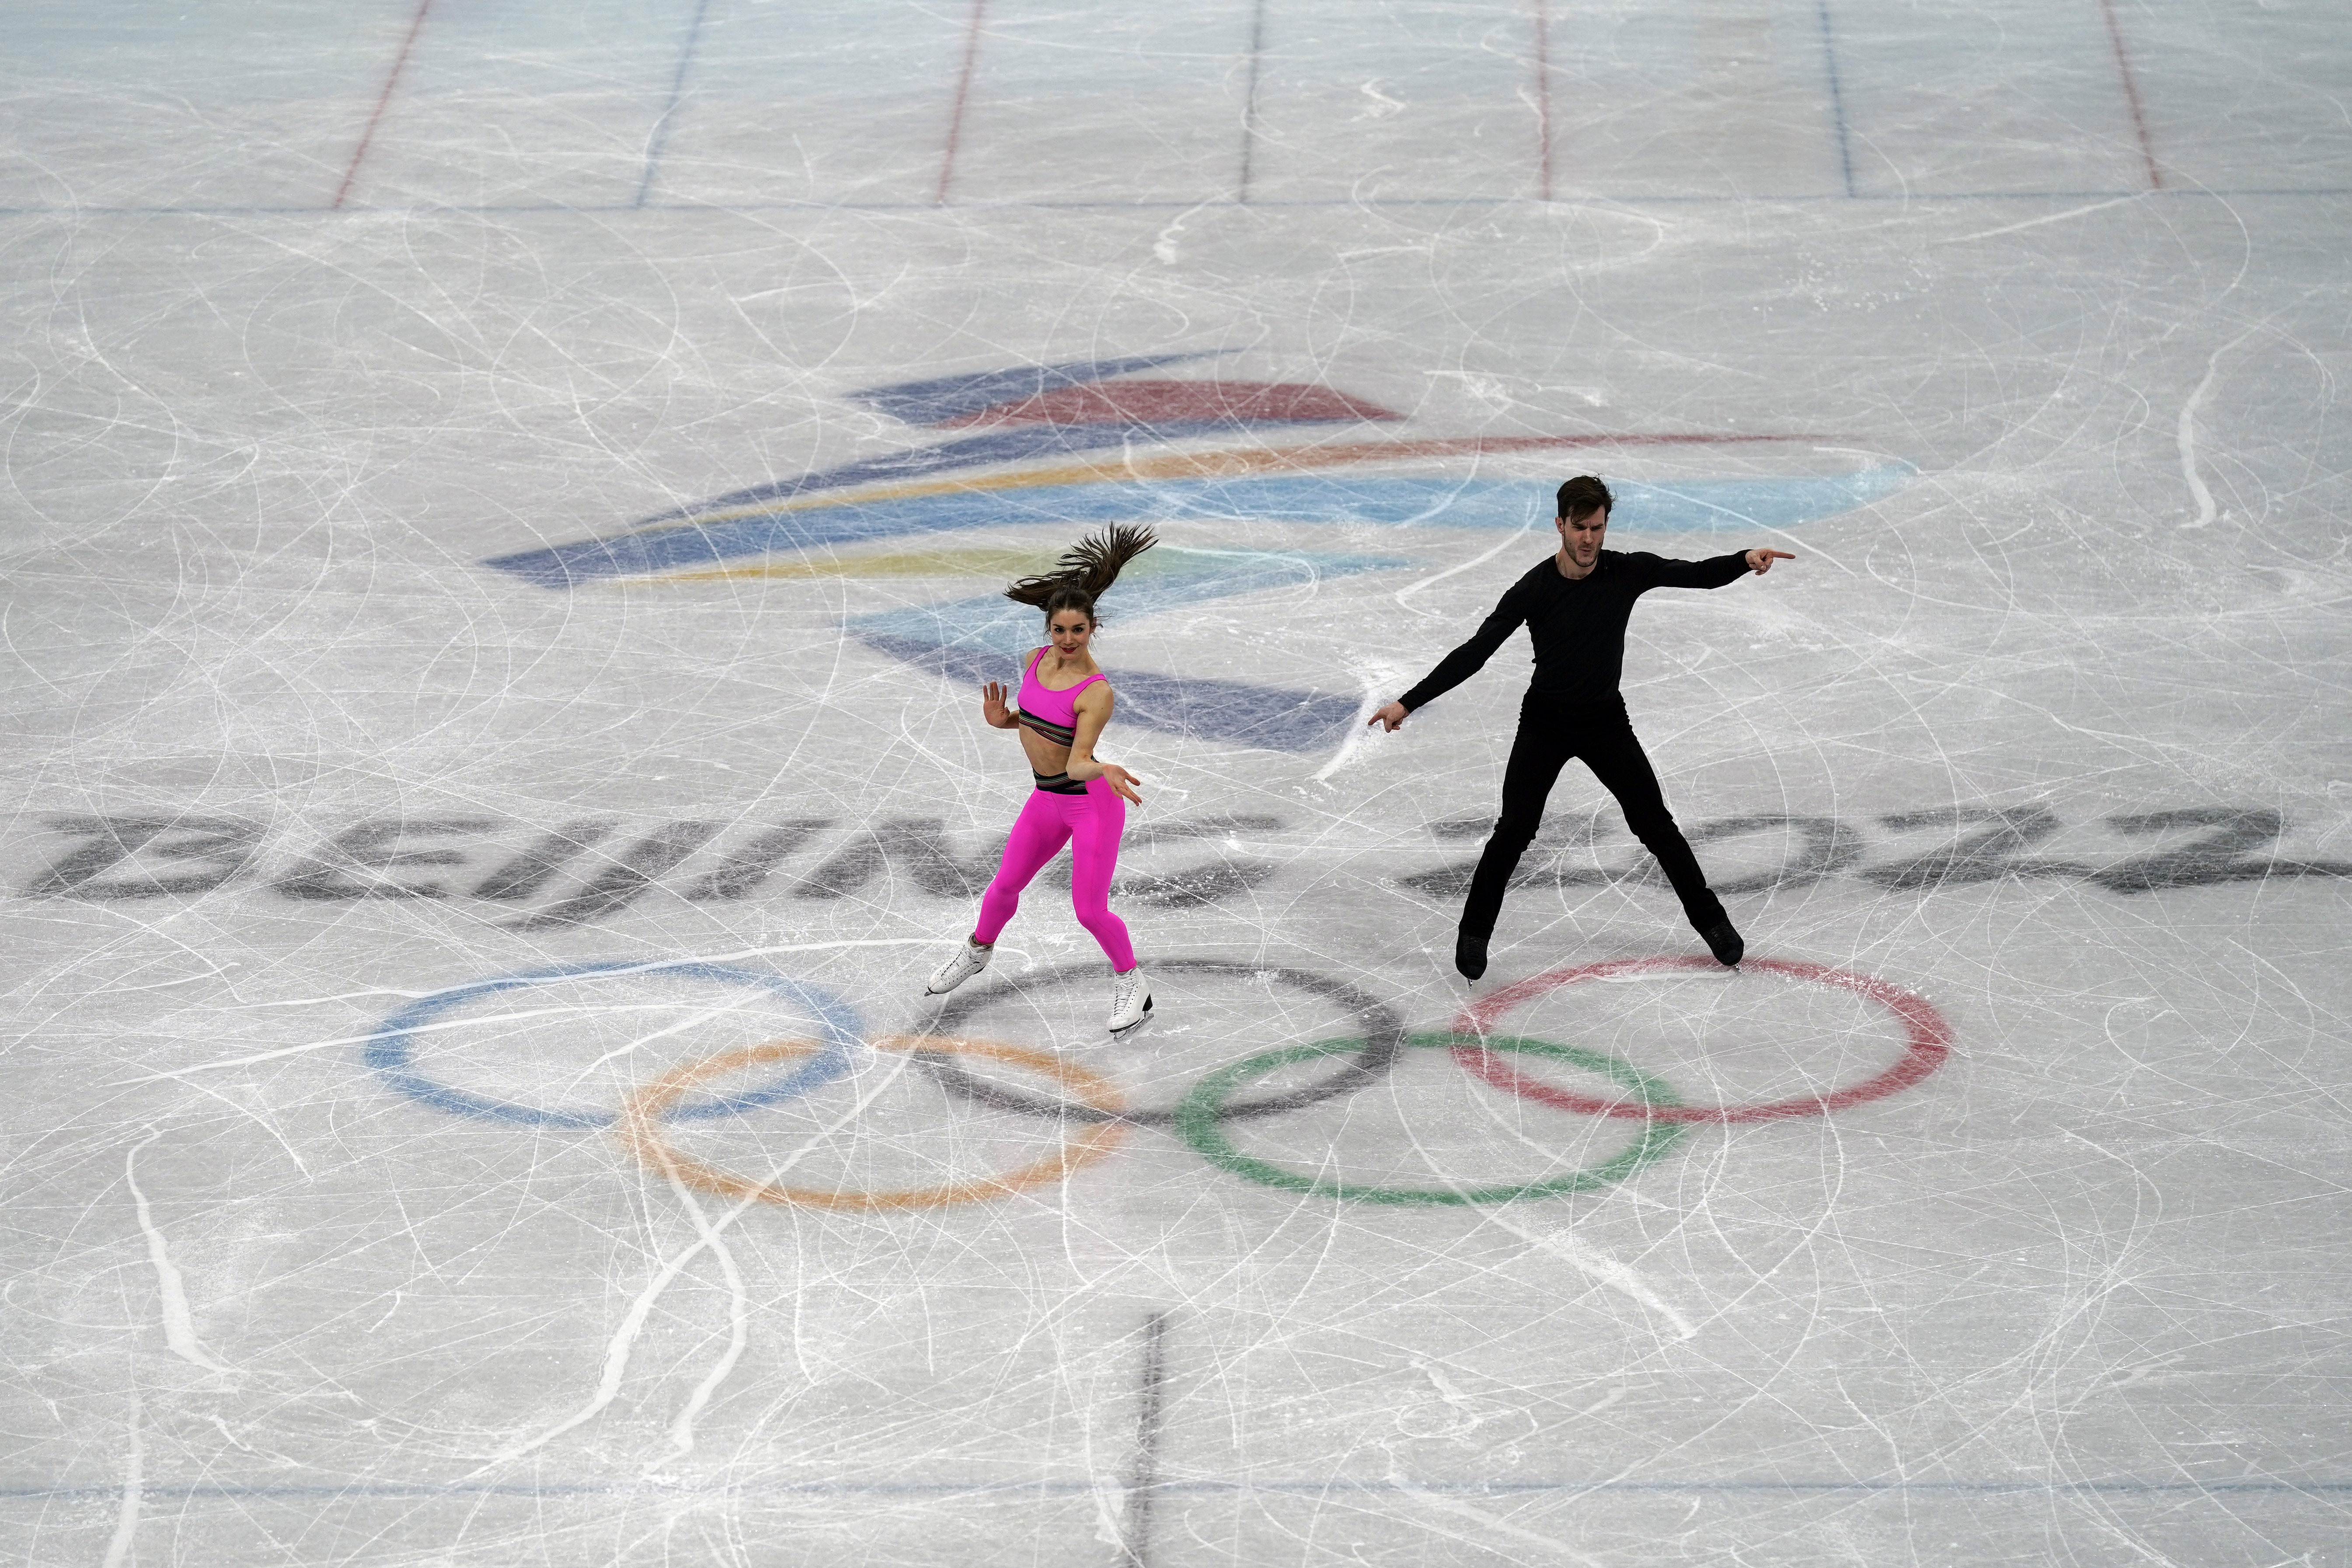 watch olympic figure skating live